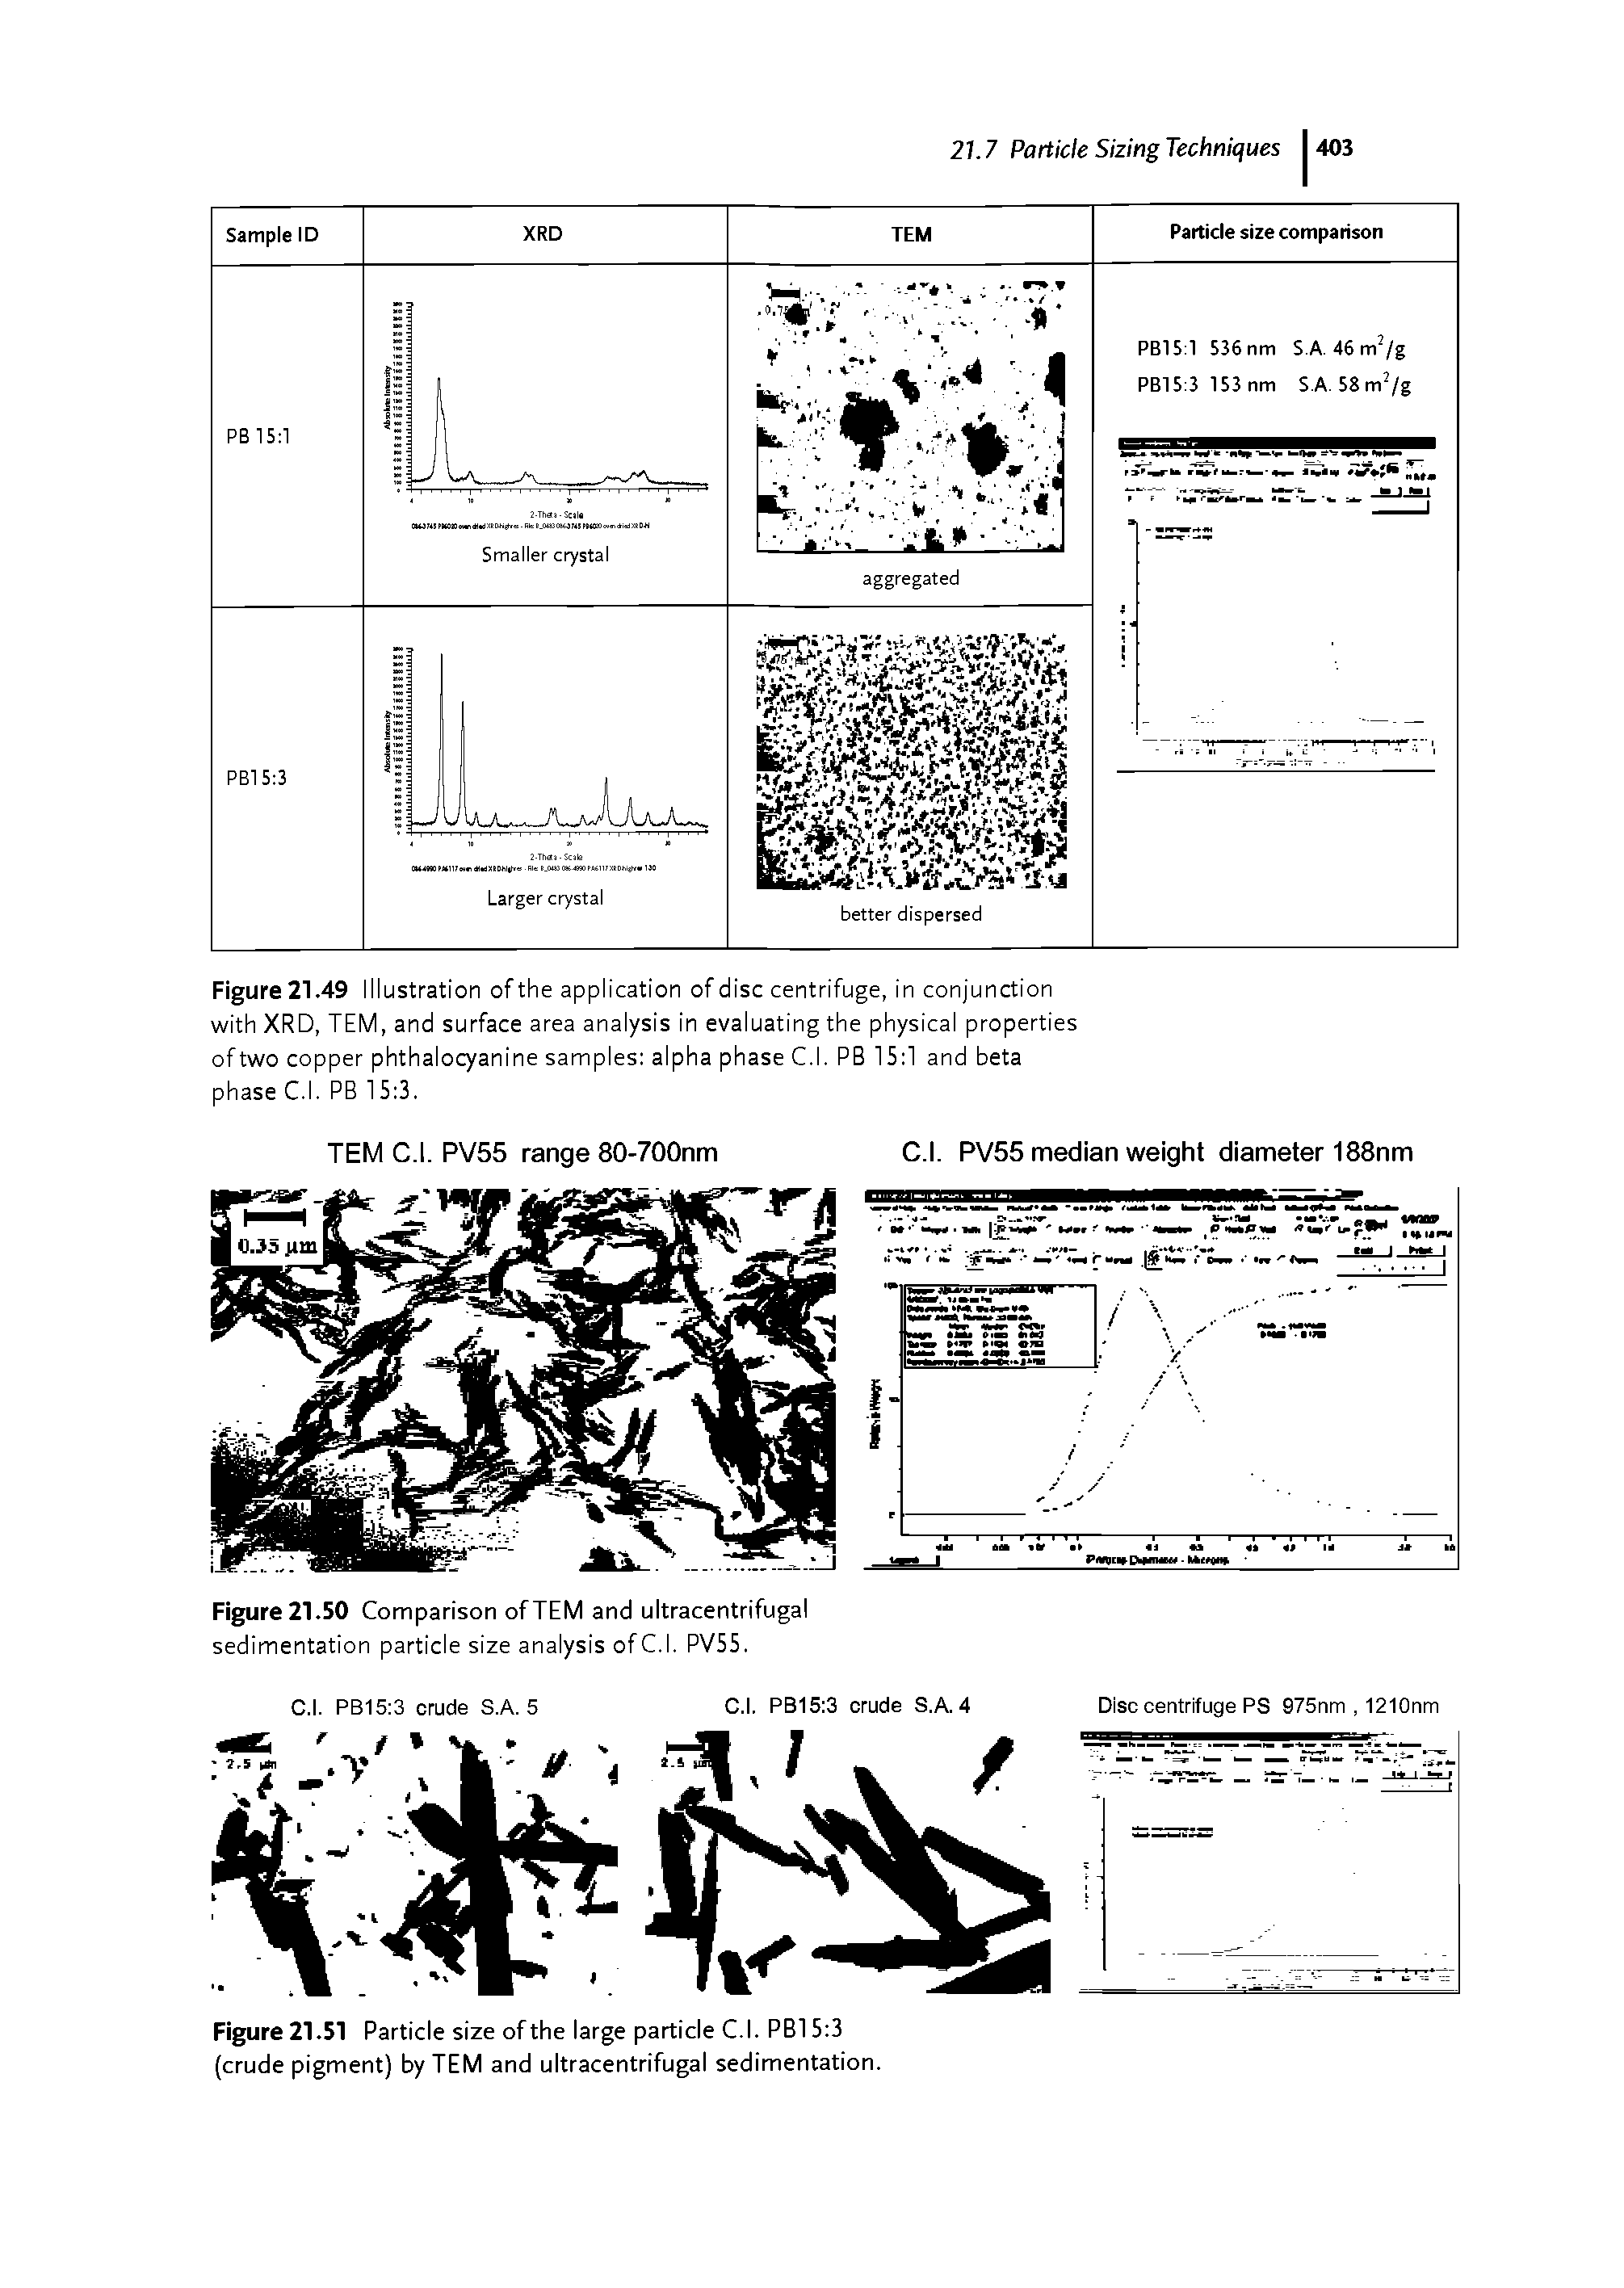 Figure 21.50 Comparison of TEM and ultracentrifugal sedimentation particle size analysis of C.l. PV55.